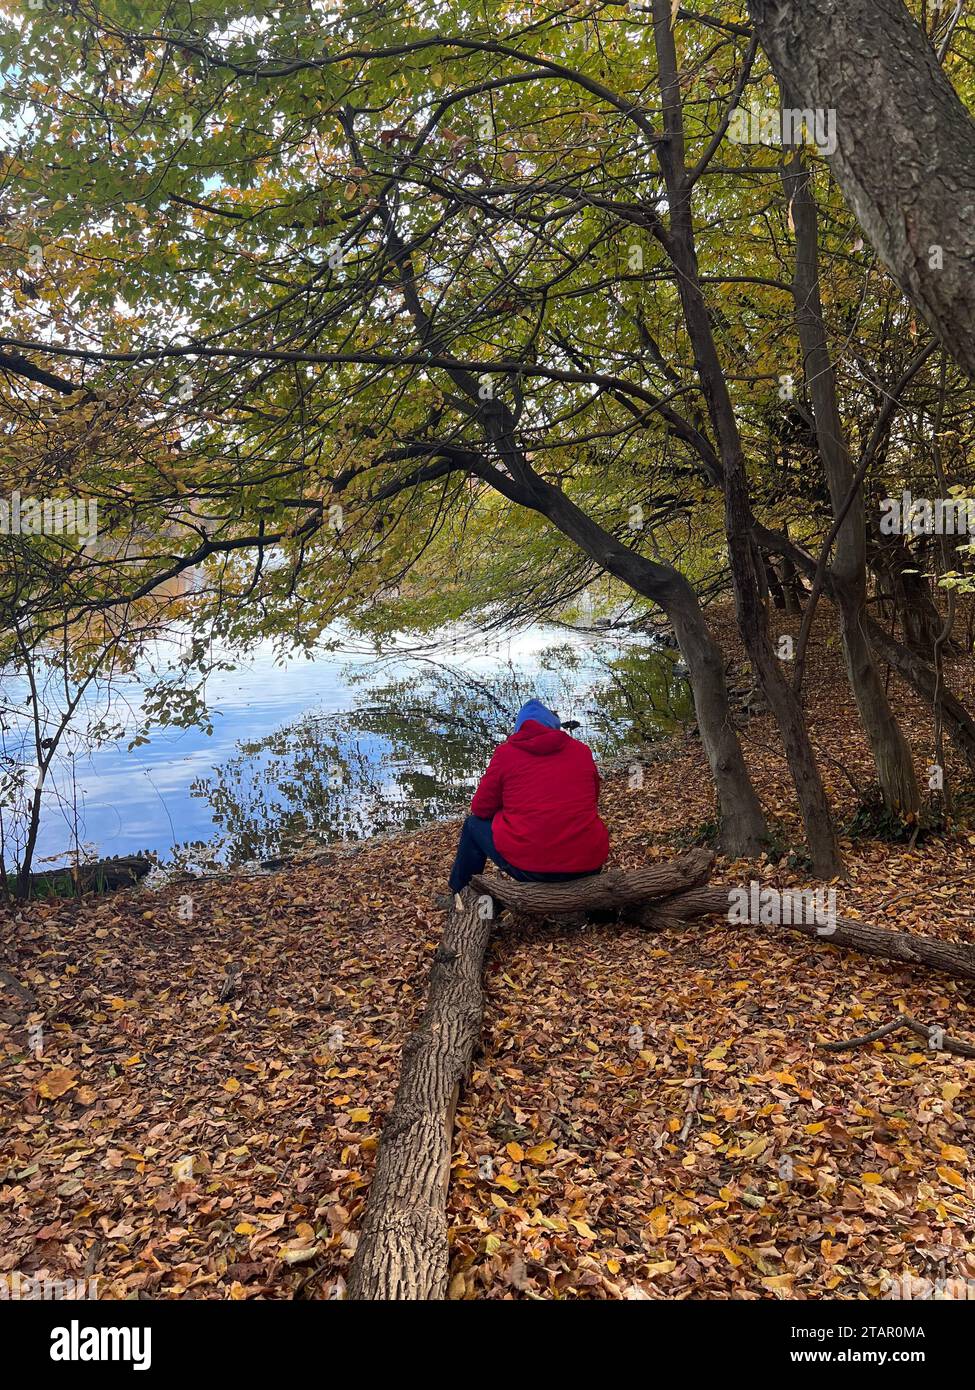 Person alone in contemplation by the lake during the autumn in Prospect Park, Brooklyn, New York. Stock Photo